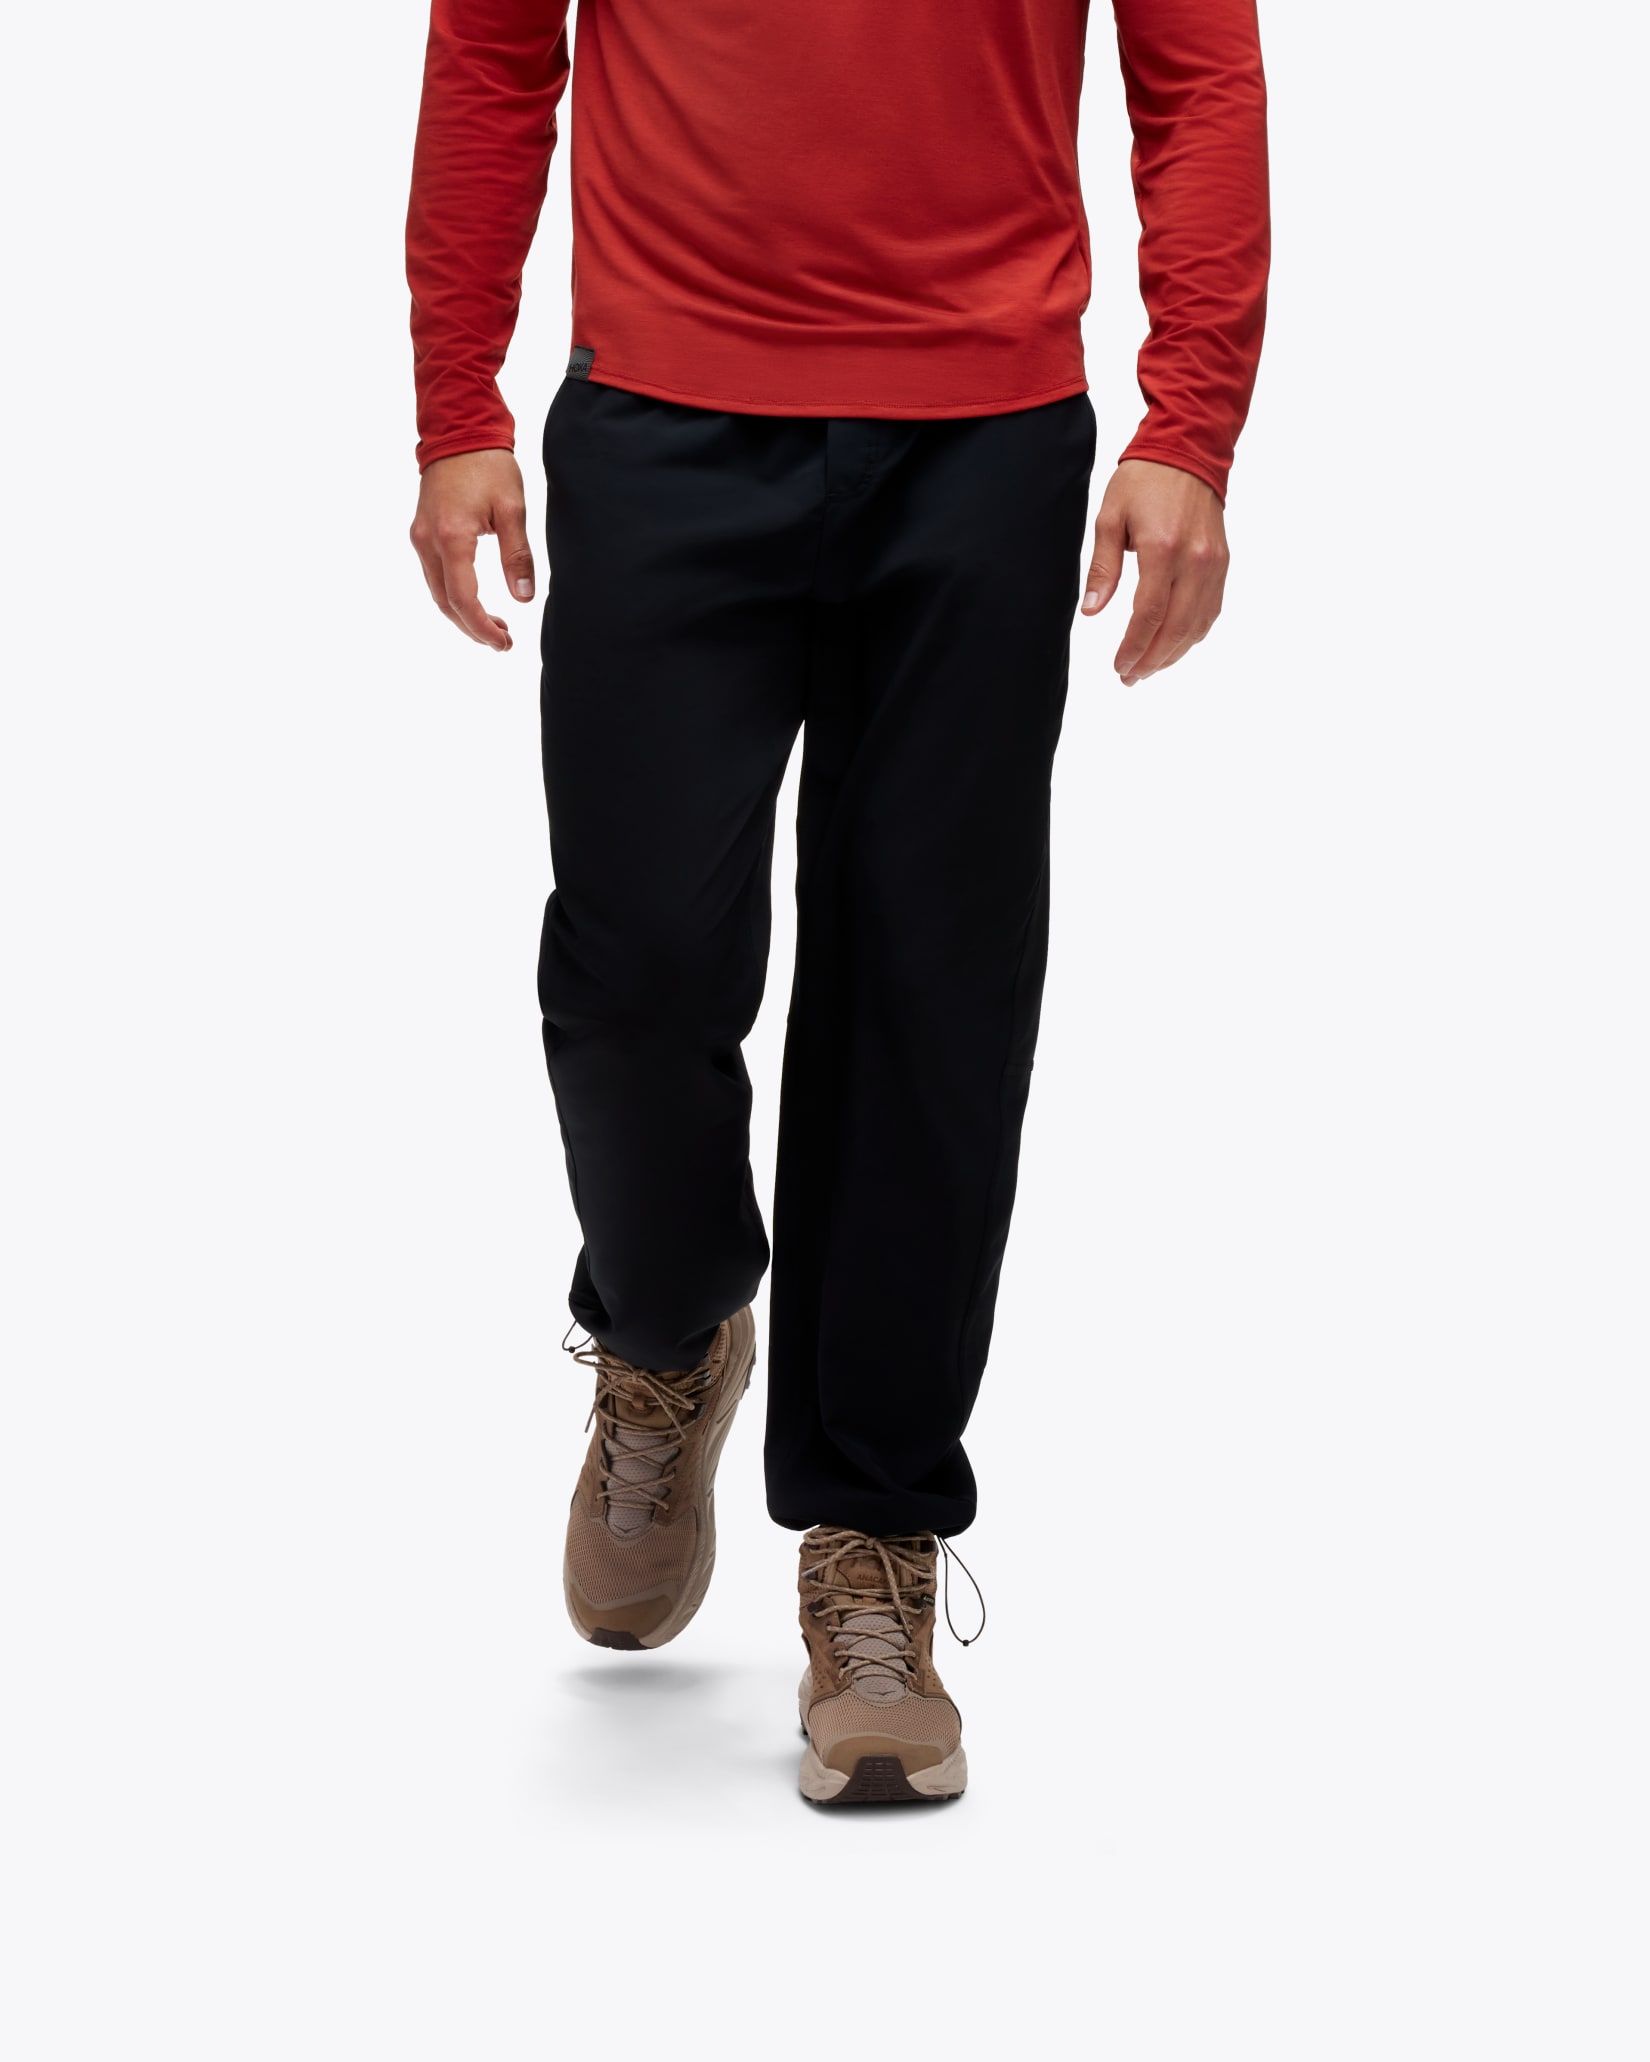 HOKA ONE ONE® Active Woven Pant for Men